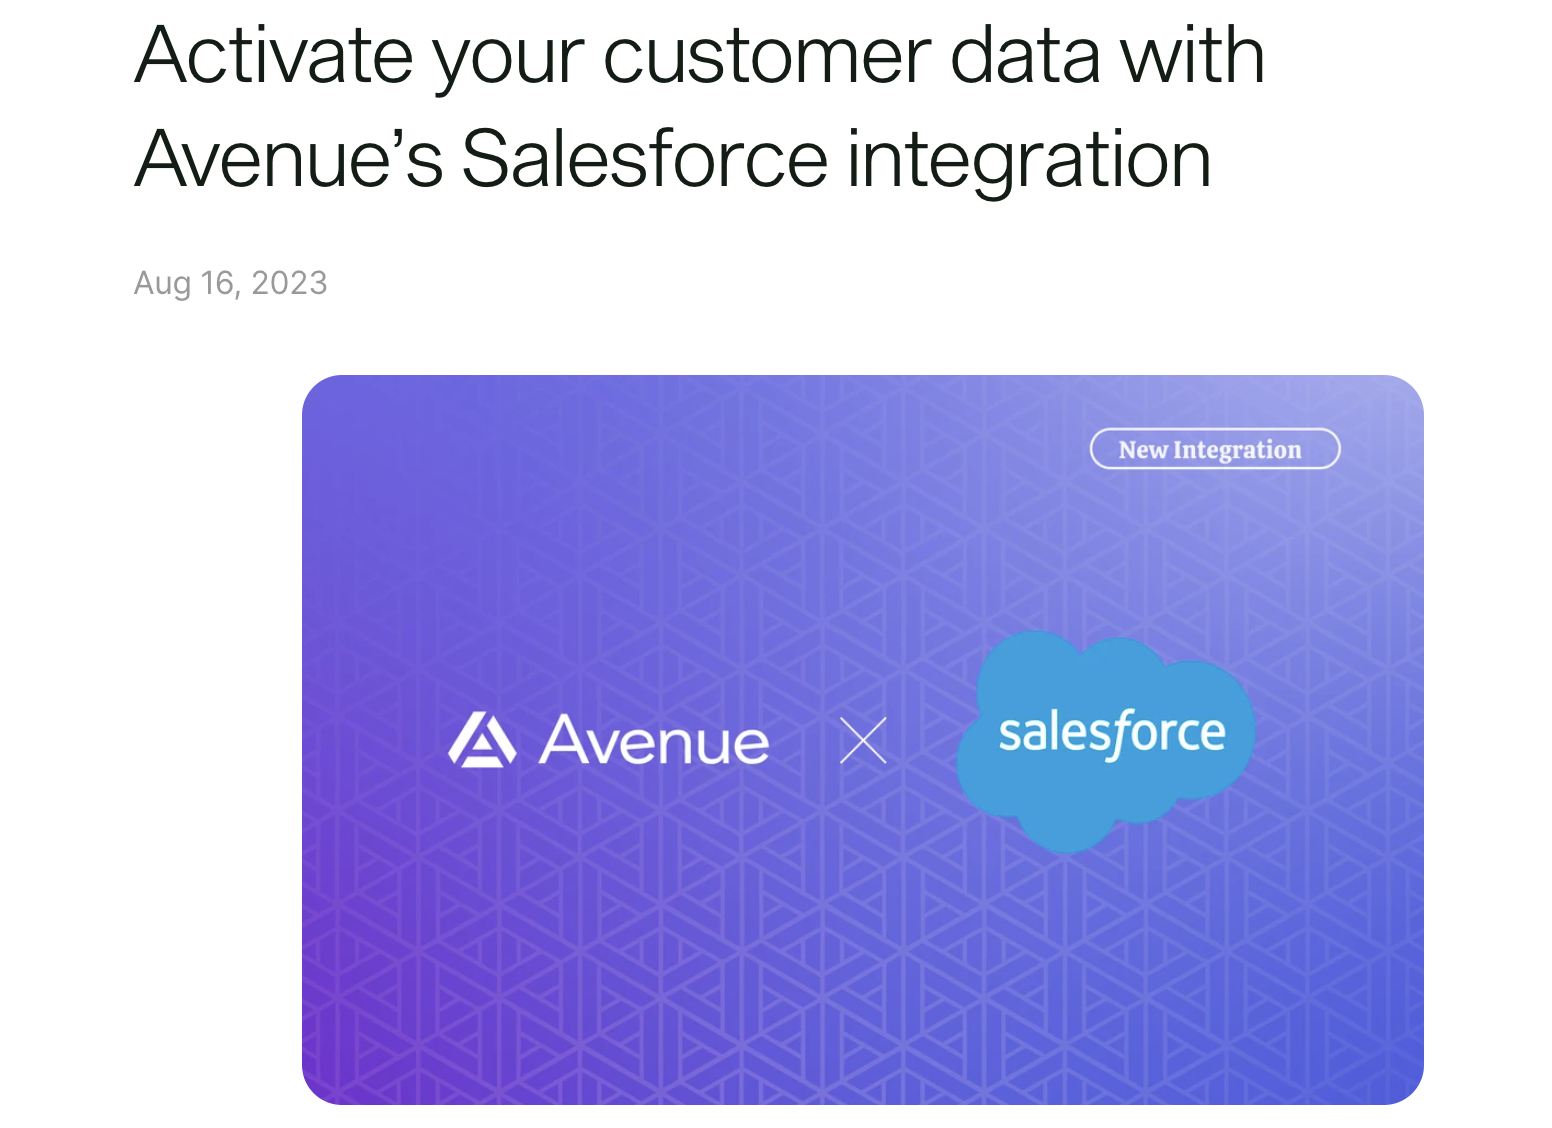 A blog post from Avenue that announces their Salesforce integration